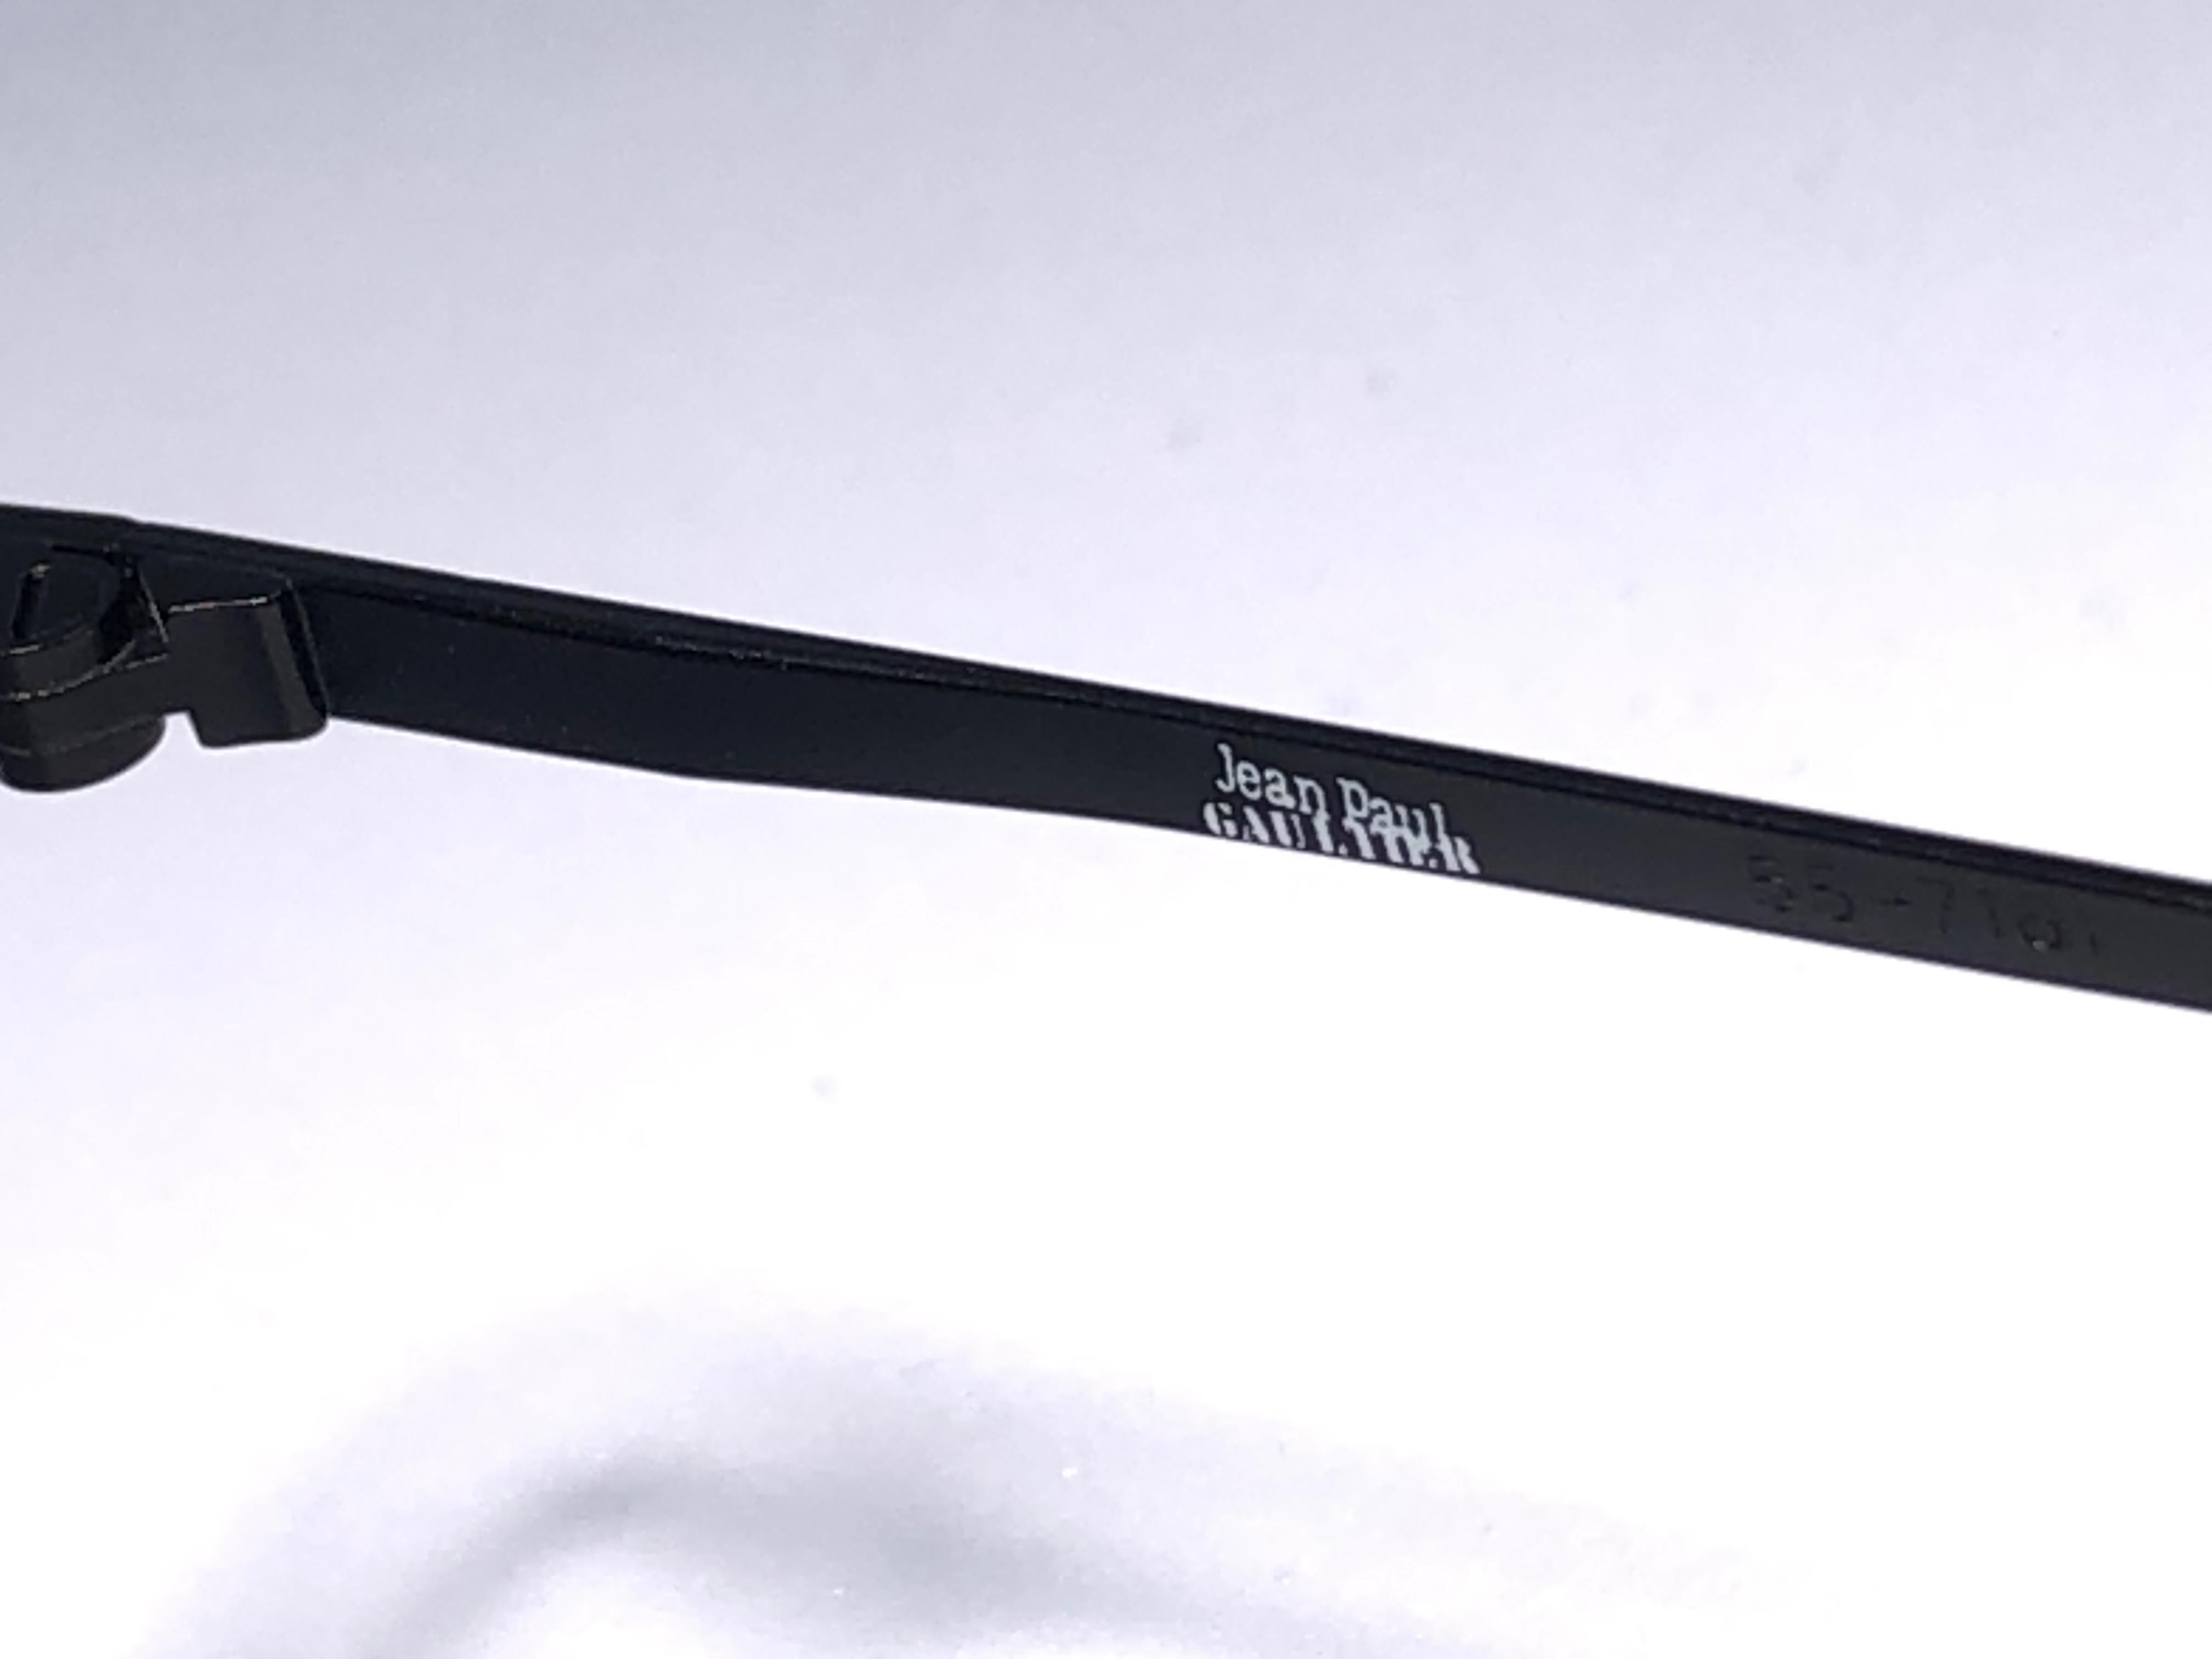 New Jean Paul Gaultier 55 7161 Half Frame Sunglasses 1990's Made in Japan  In New Condition For Sale In Baleares, Baleares